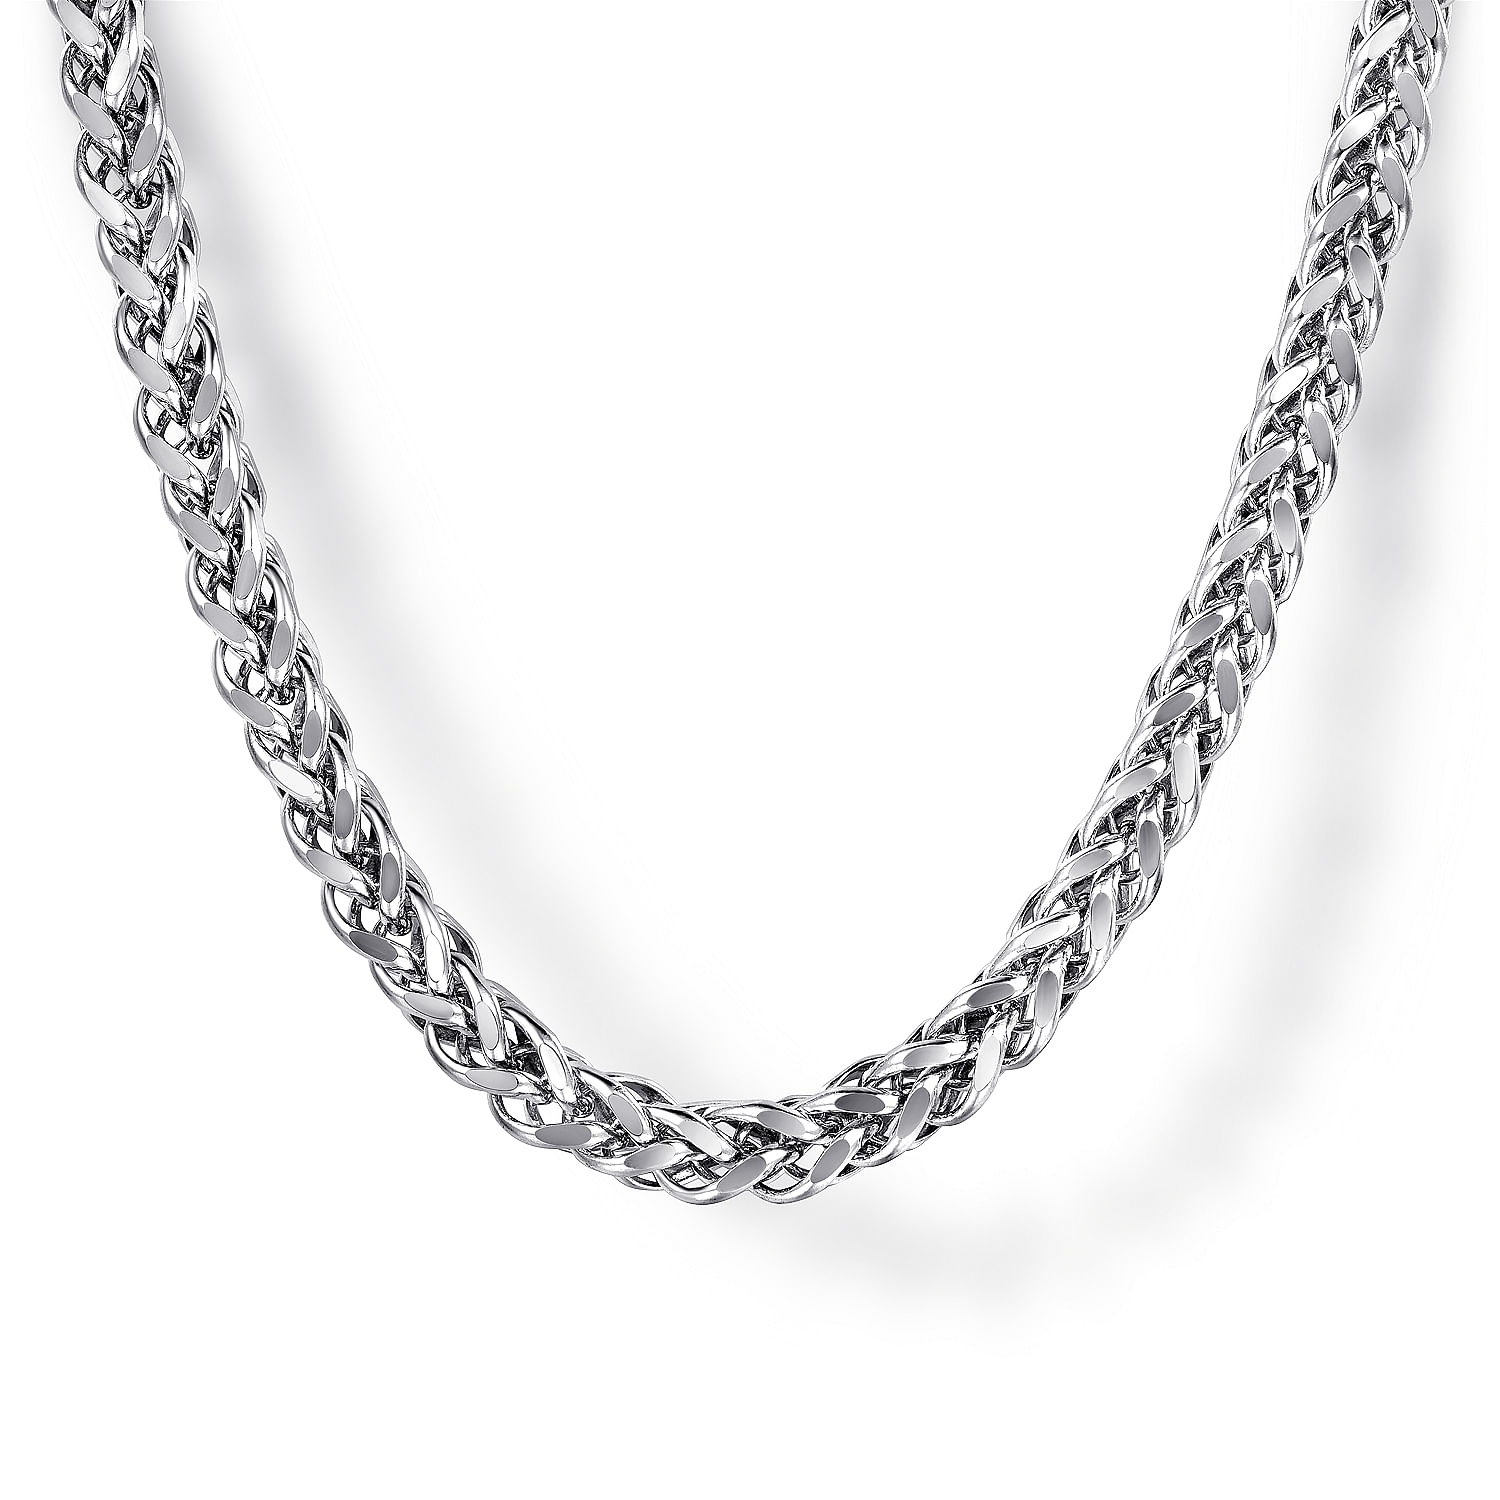 22-Inch-925-Sterling-Silver-Men's-Wheat-Chain-Necklace-1